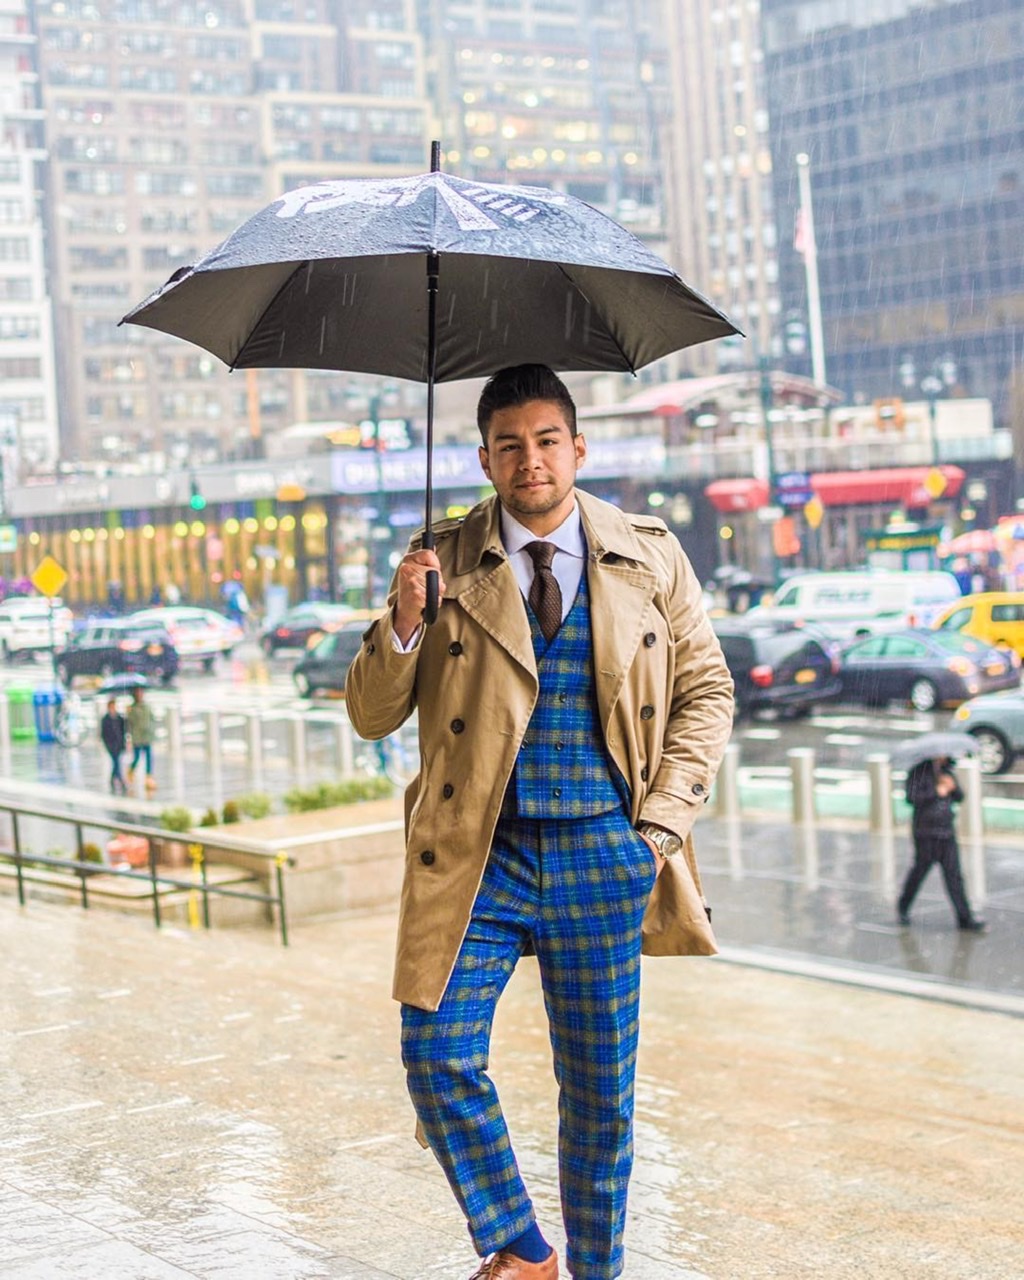 BLUE CHECK TWEED EFFECT THREE-PIECE SUIT - dandy in the bronx - WHITE shirt and brown tie - IN THE RAIN